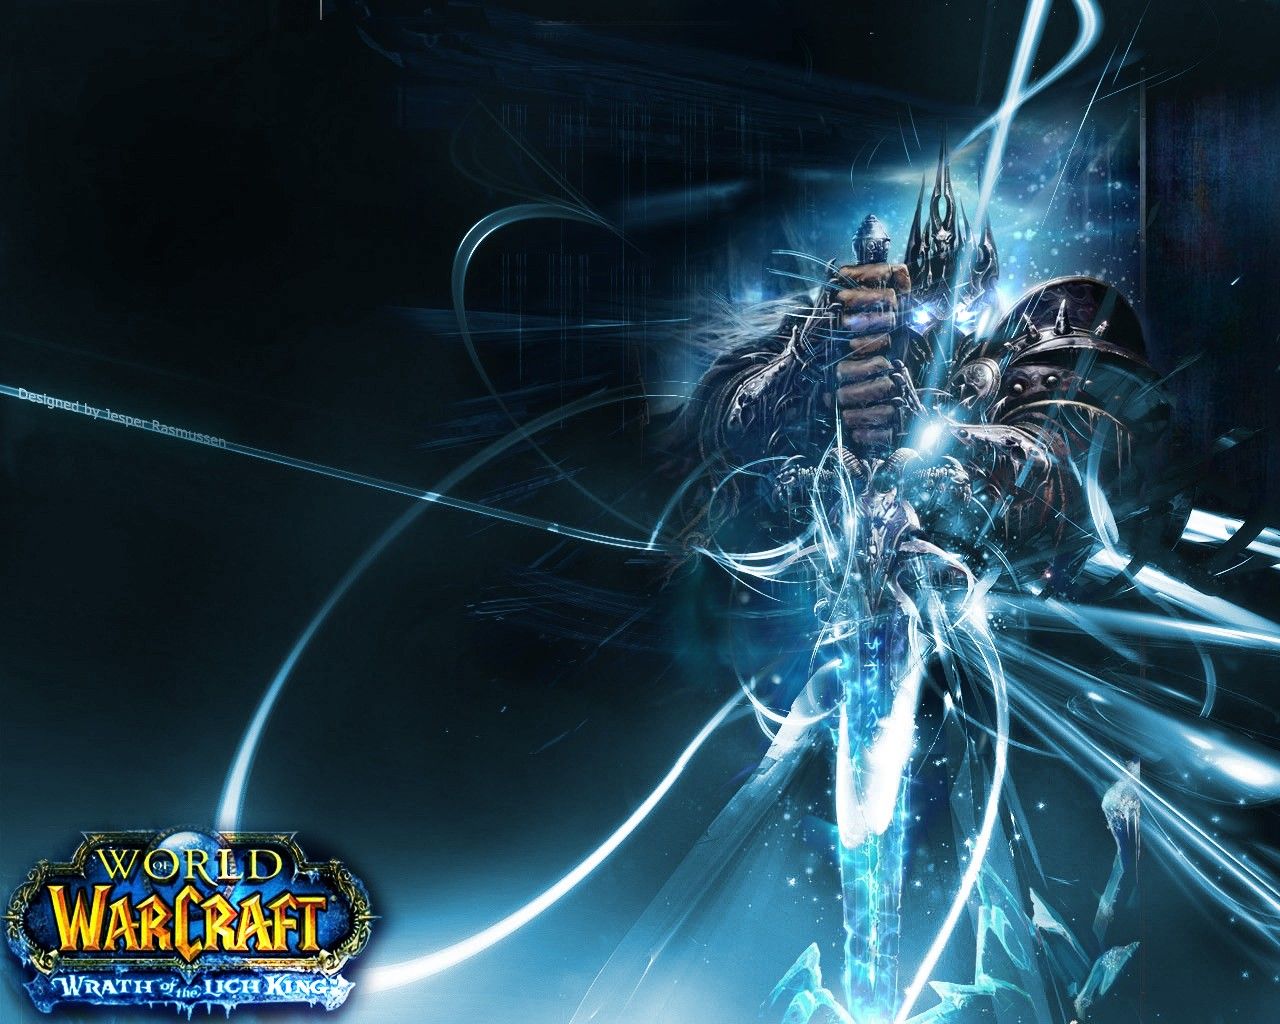 Wrath Of The Lich King Wallpaper - World Of Warcraft Arthas Lich King , HD Wallpaper & Backgrounds